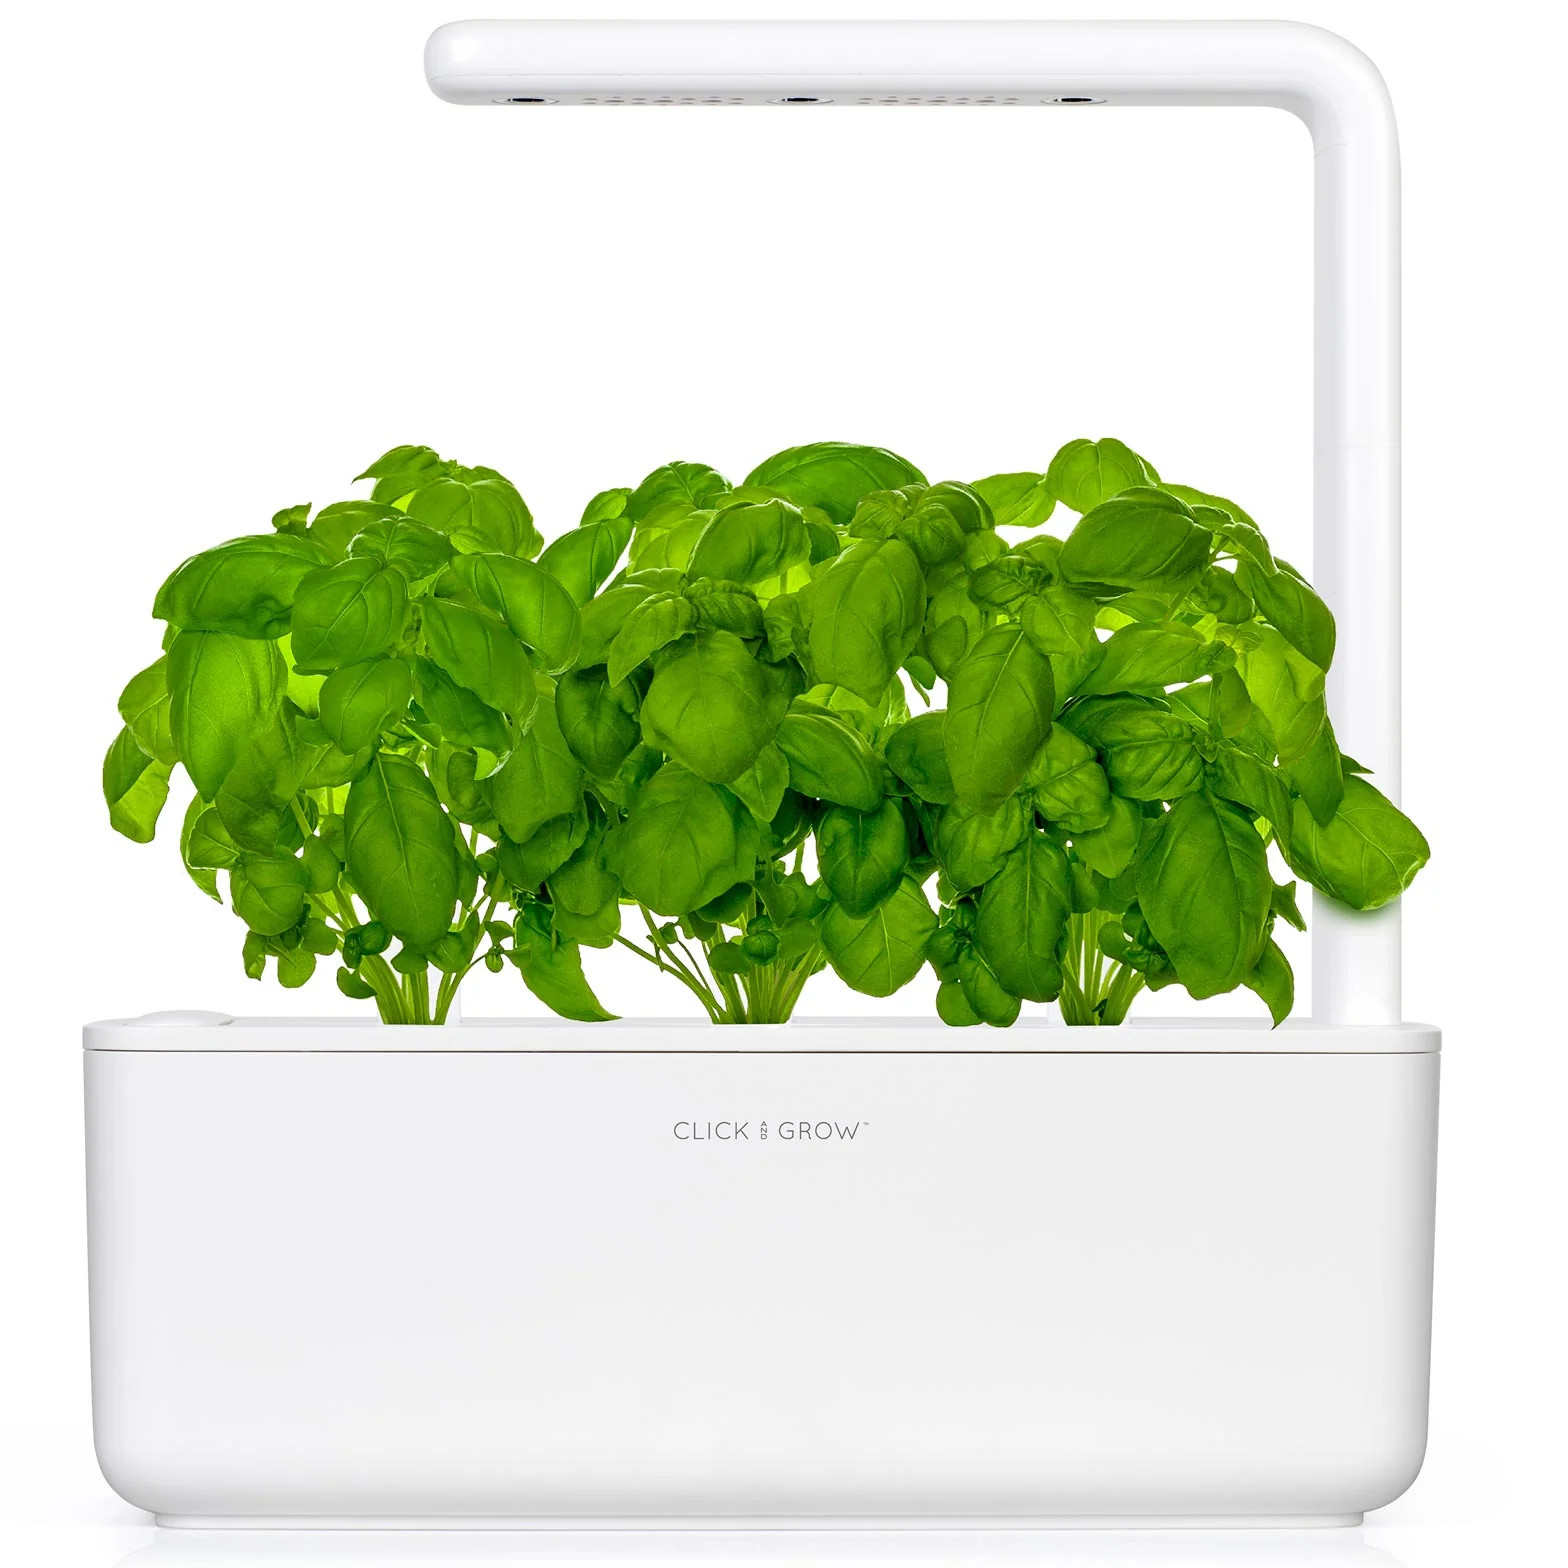 Click & Grow - Smart Garden 3 Indoor Gardening System with Grow Light and 3 Plant Pods